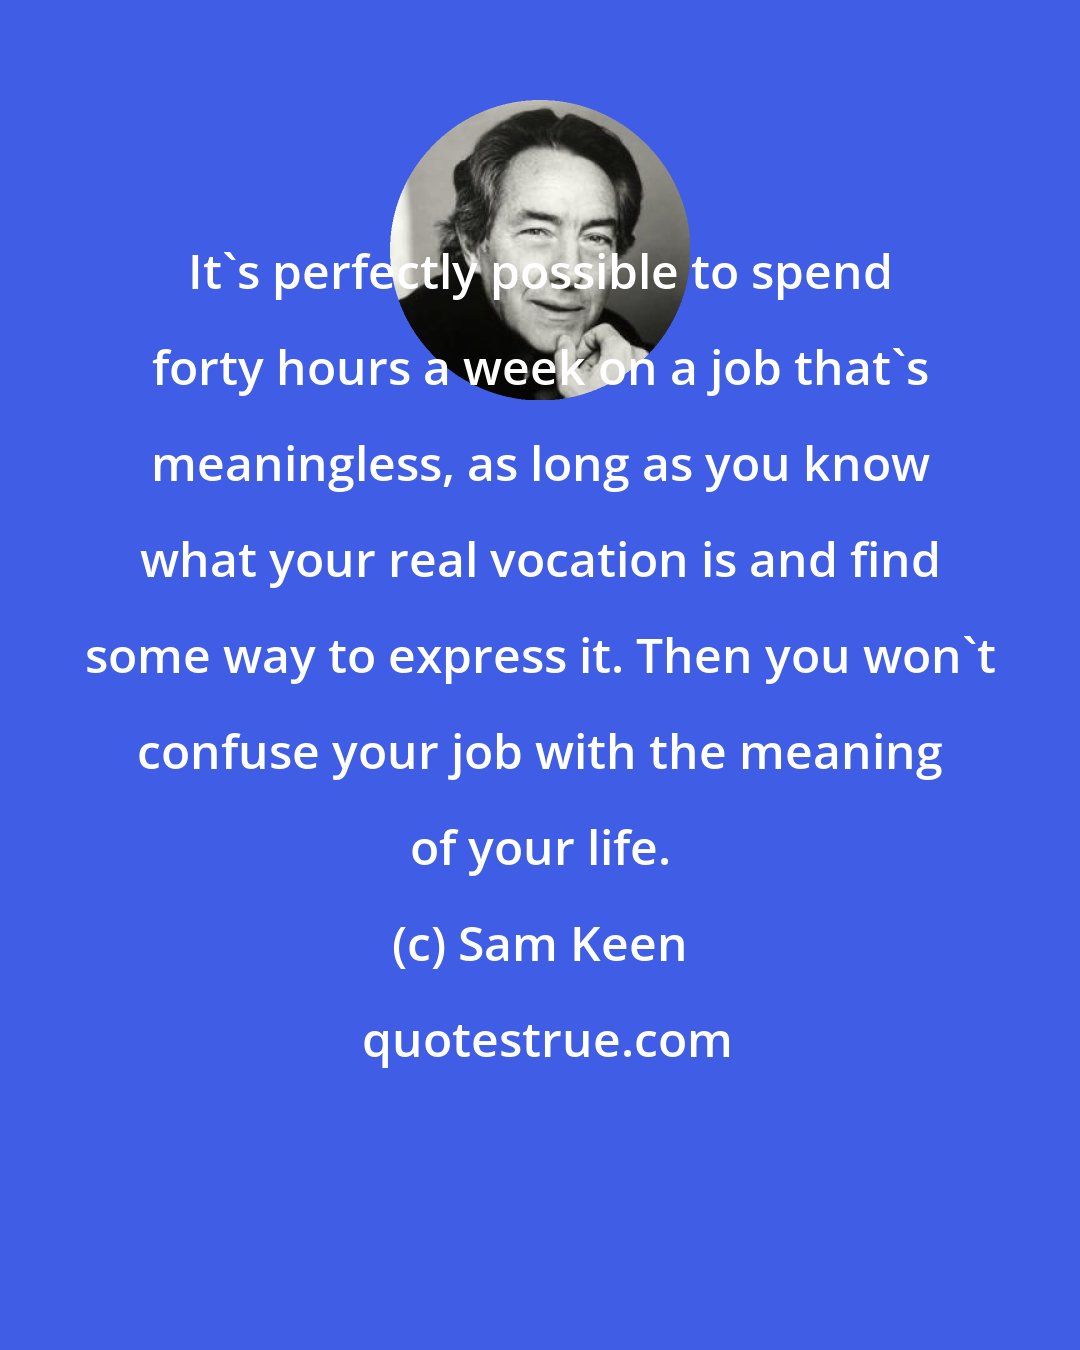 Sam Keen: It's perfectly possible to spend forty hours a week on a job that's meaningless, as long as you know what your real vocation is and find some way to express it. Then you won't confuse your job with the meaning of your life.